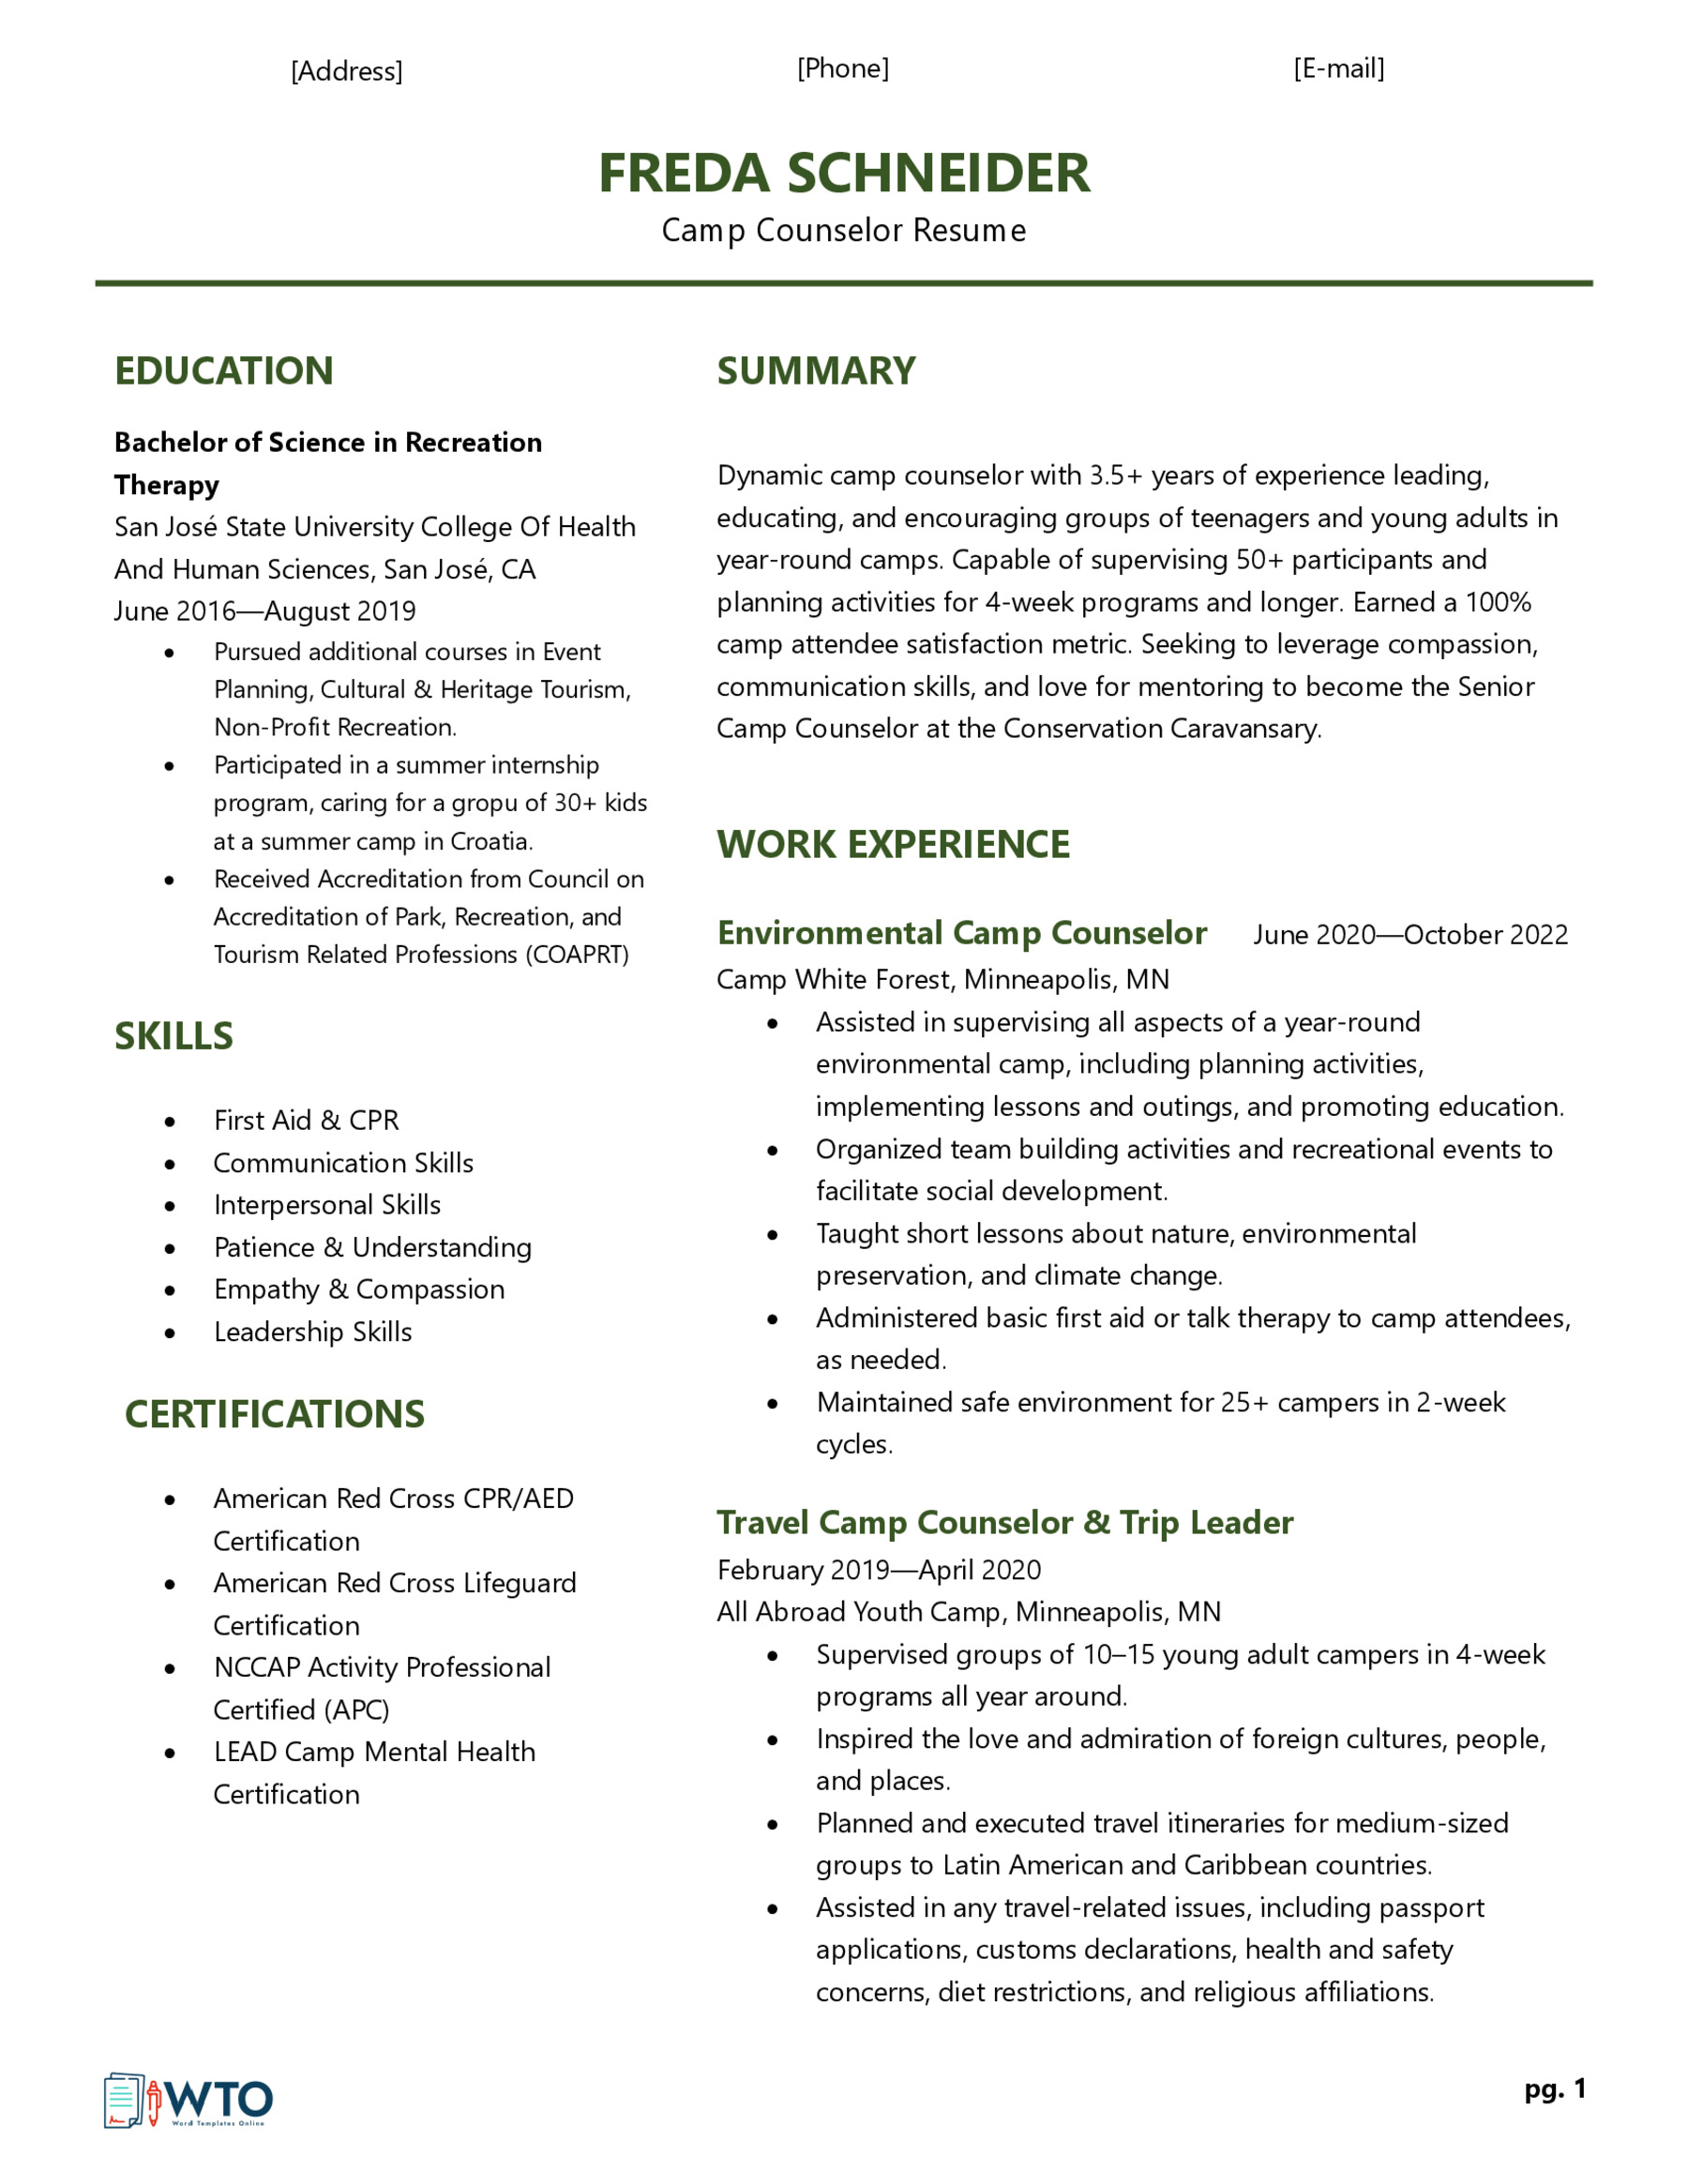 Camp Counselor Resume Example - Professional Sample